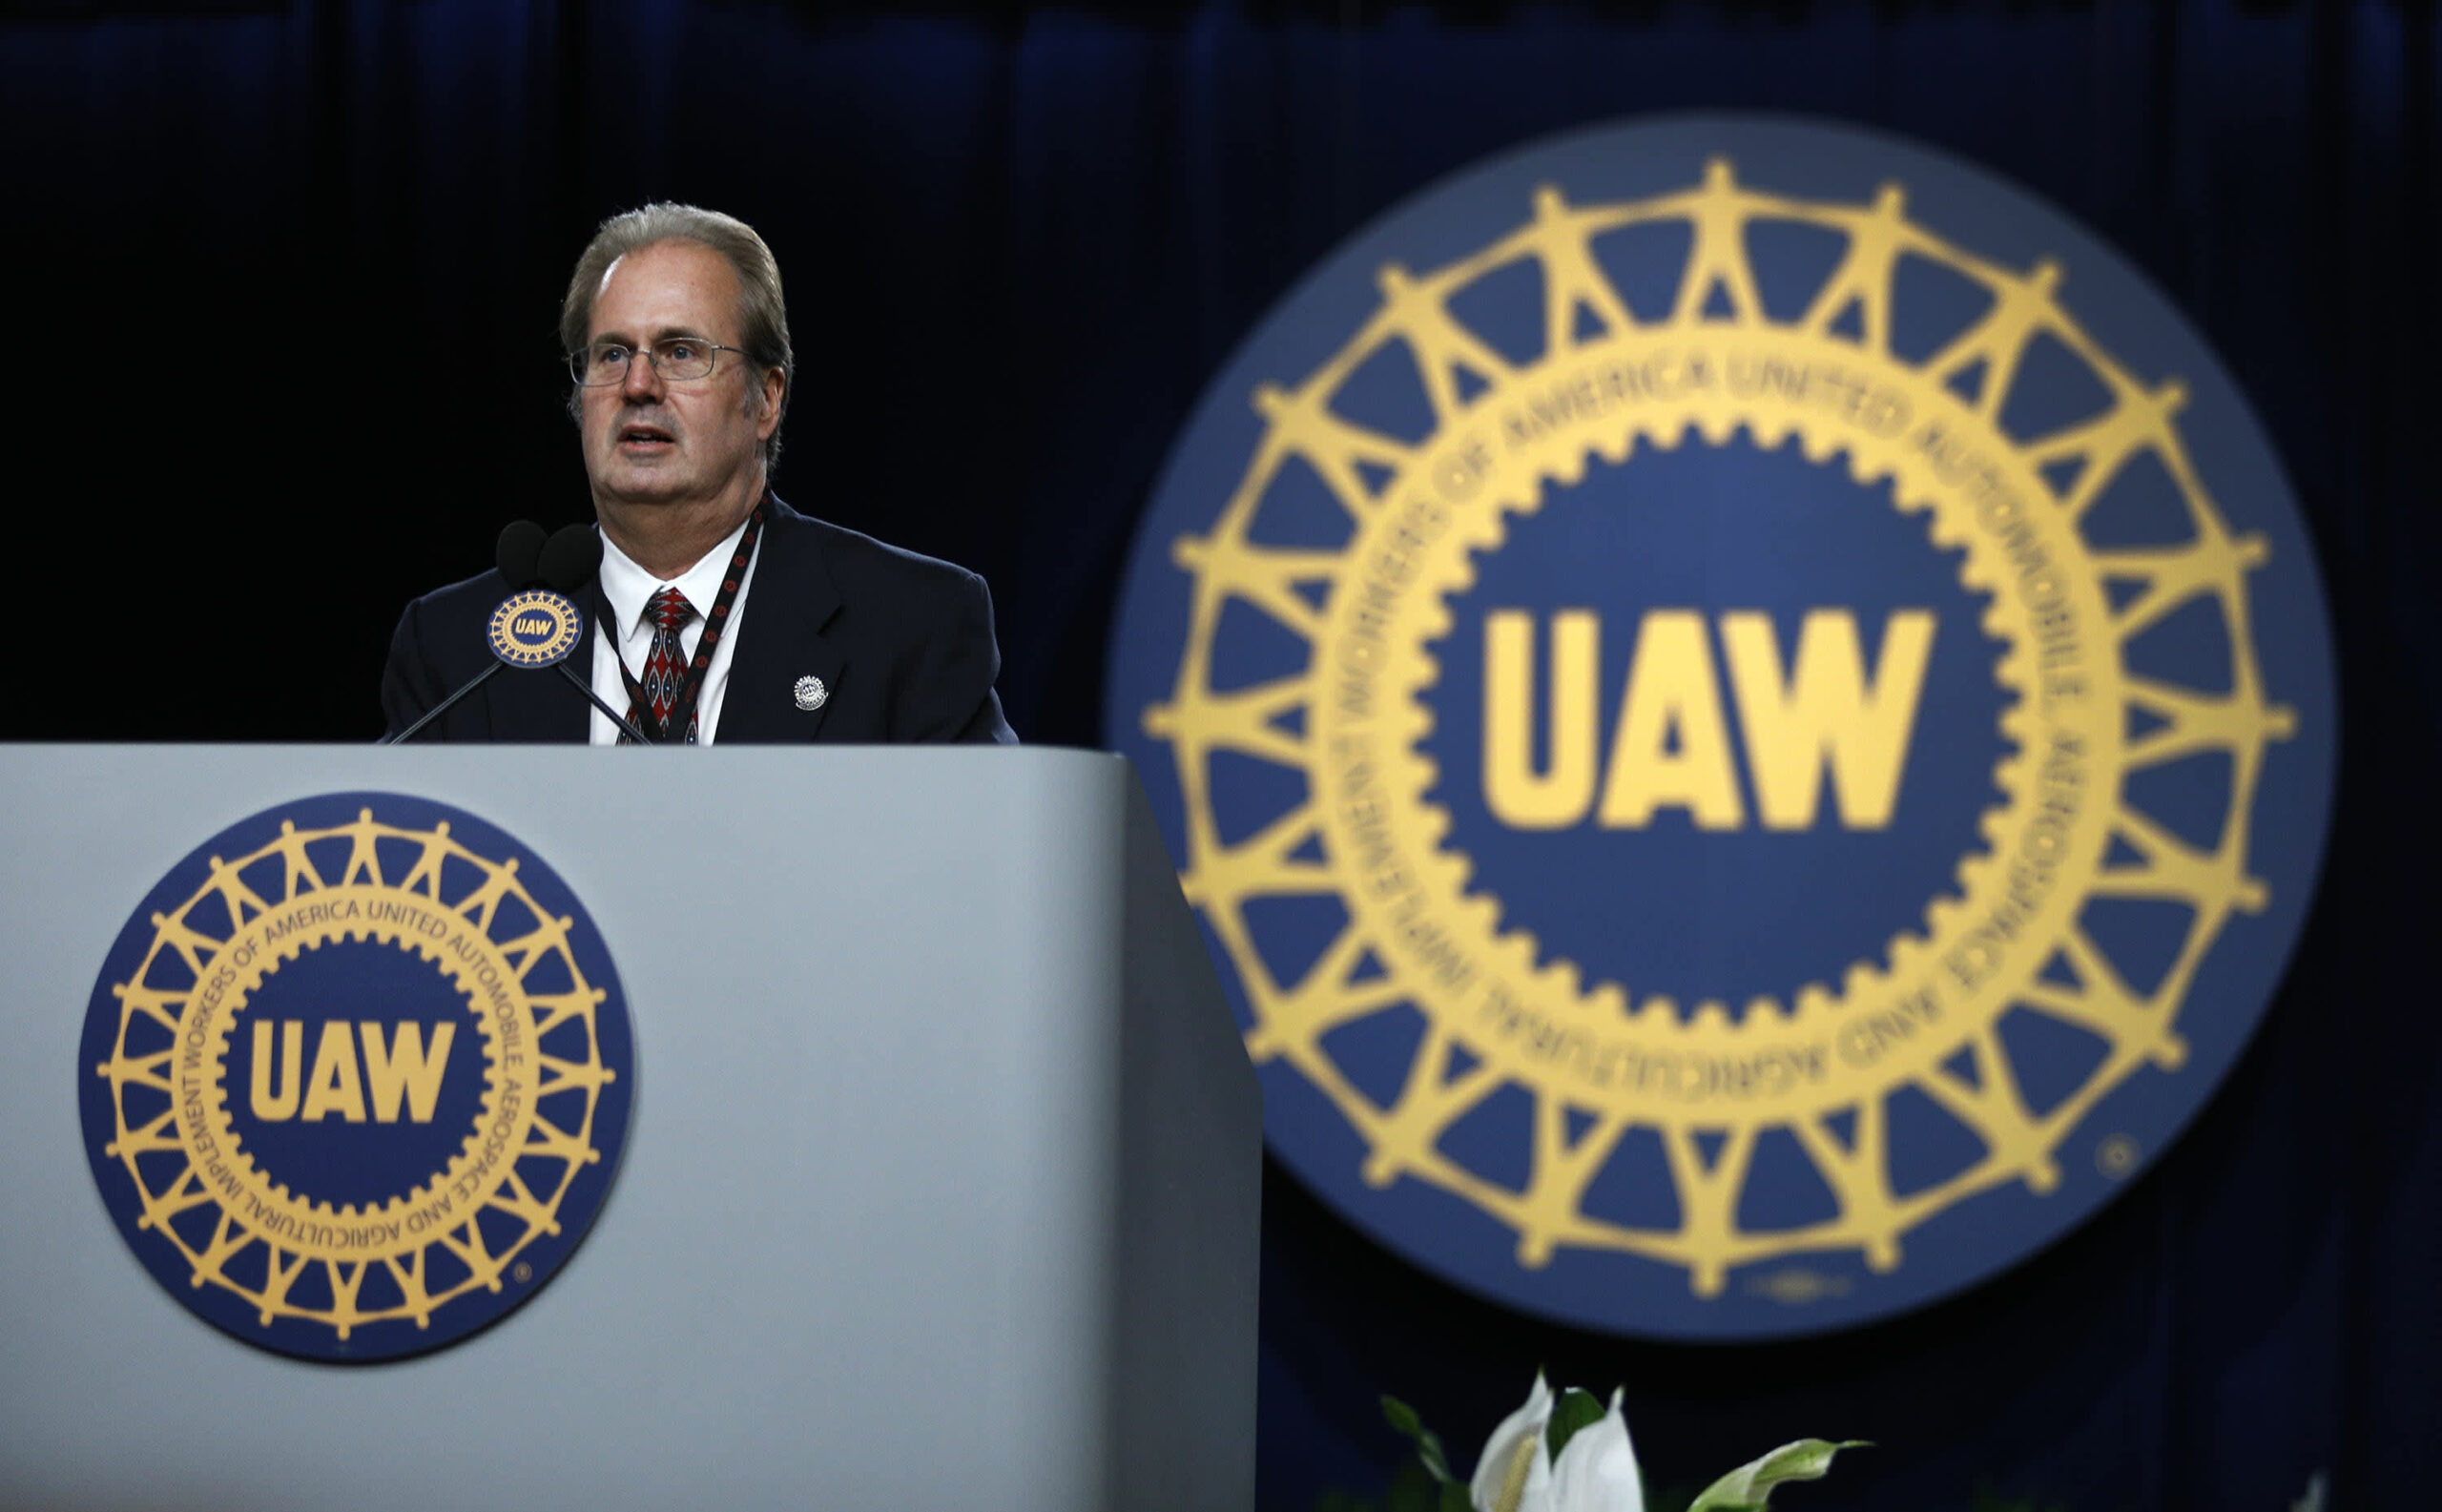 Corruption probe leads to first overhaul of UAW elections in decades